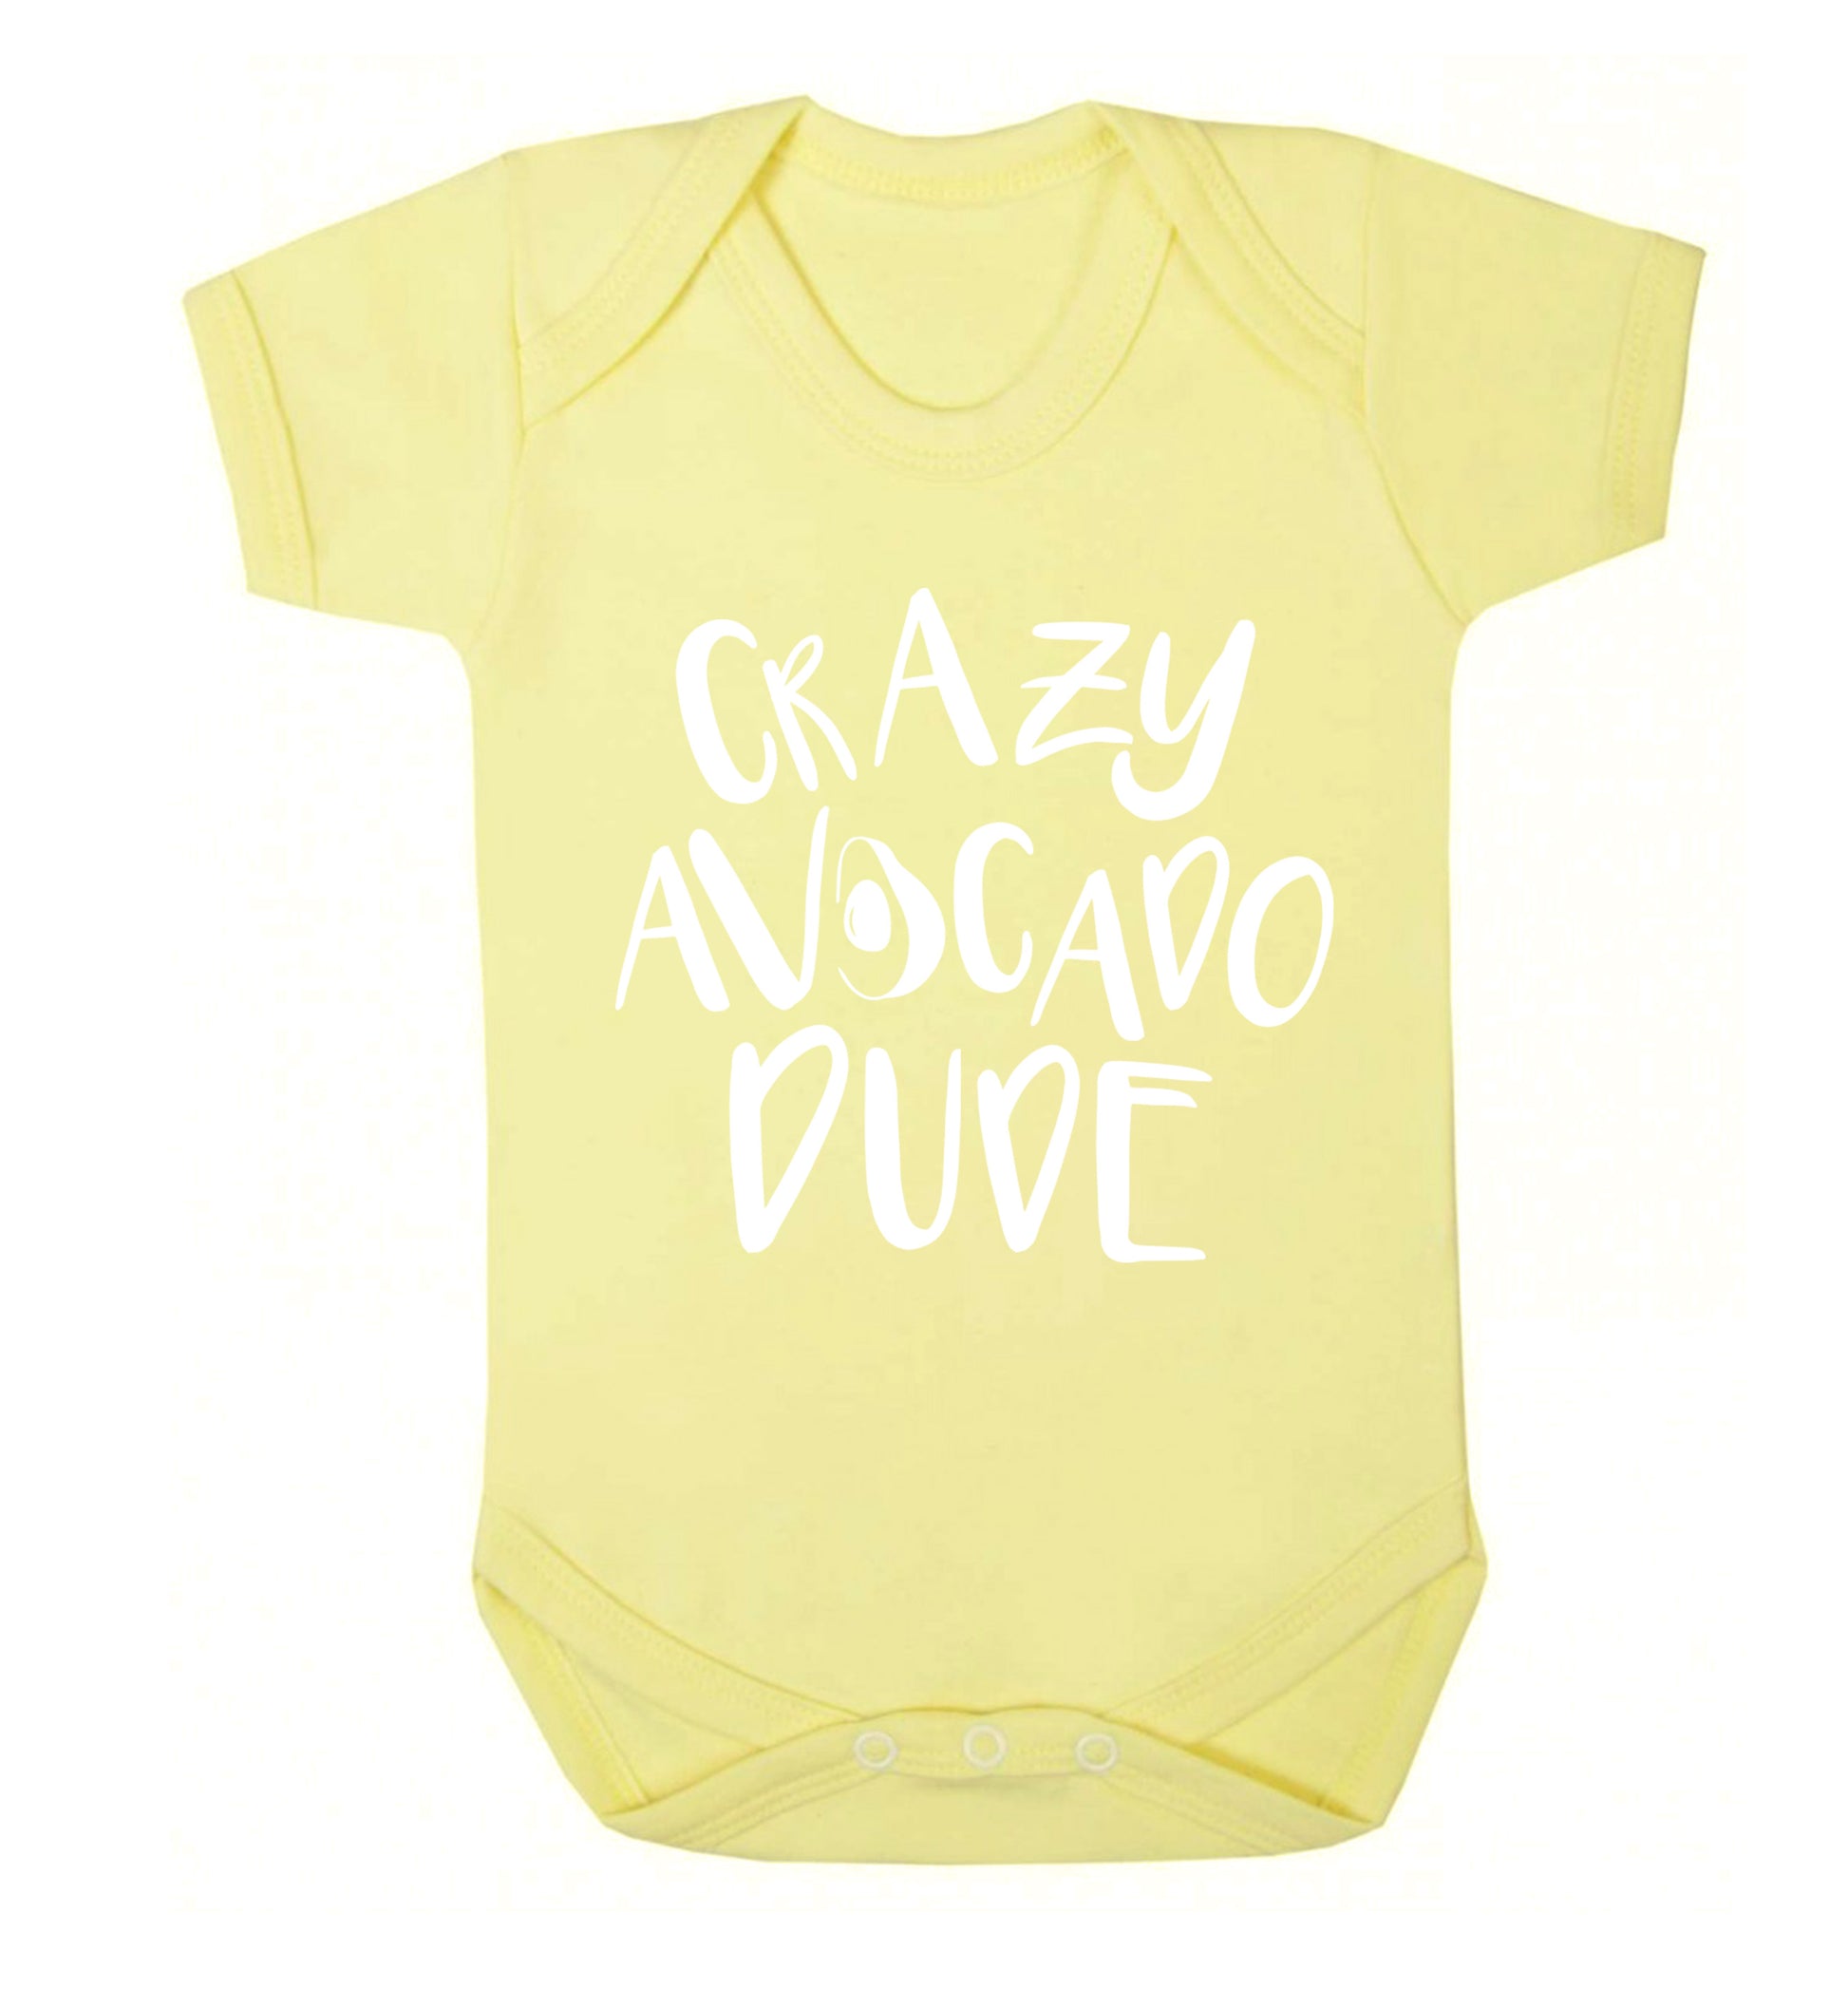 Crazy avocado dude Baby Vest pale yellow 18-24 months